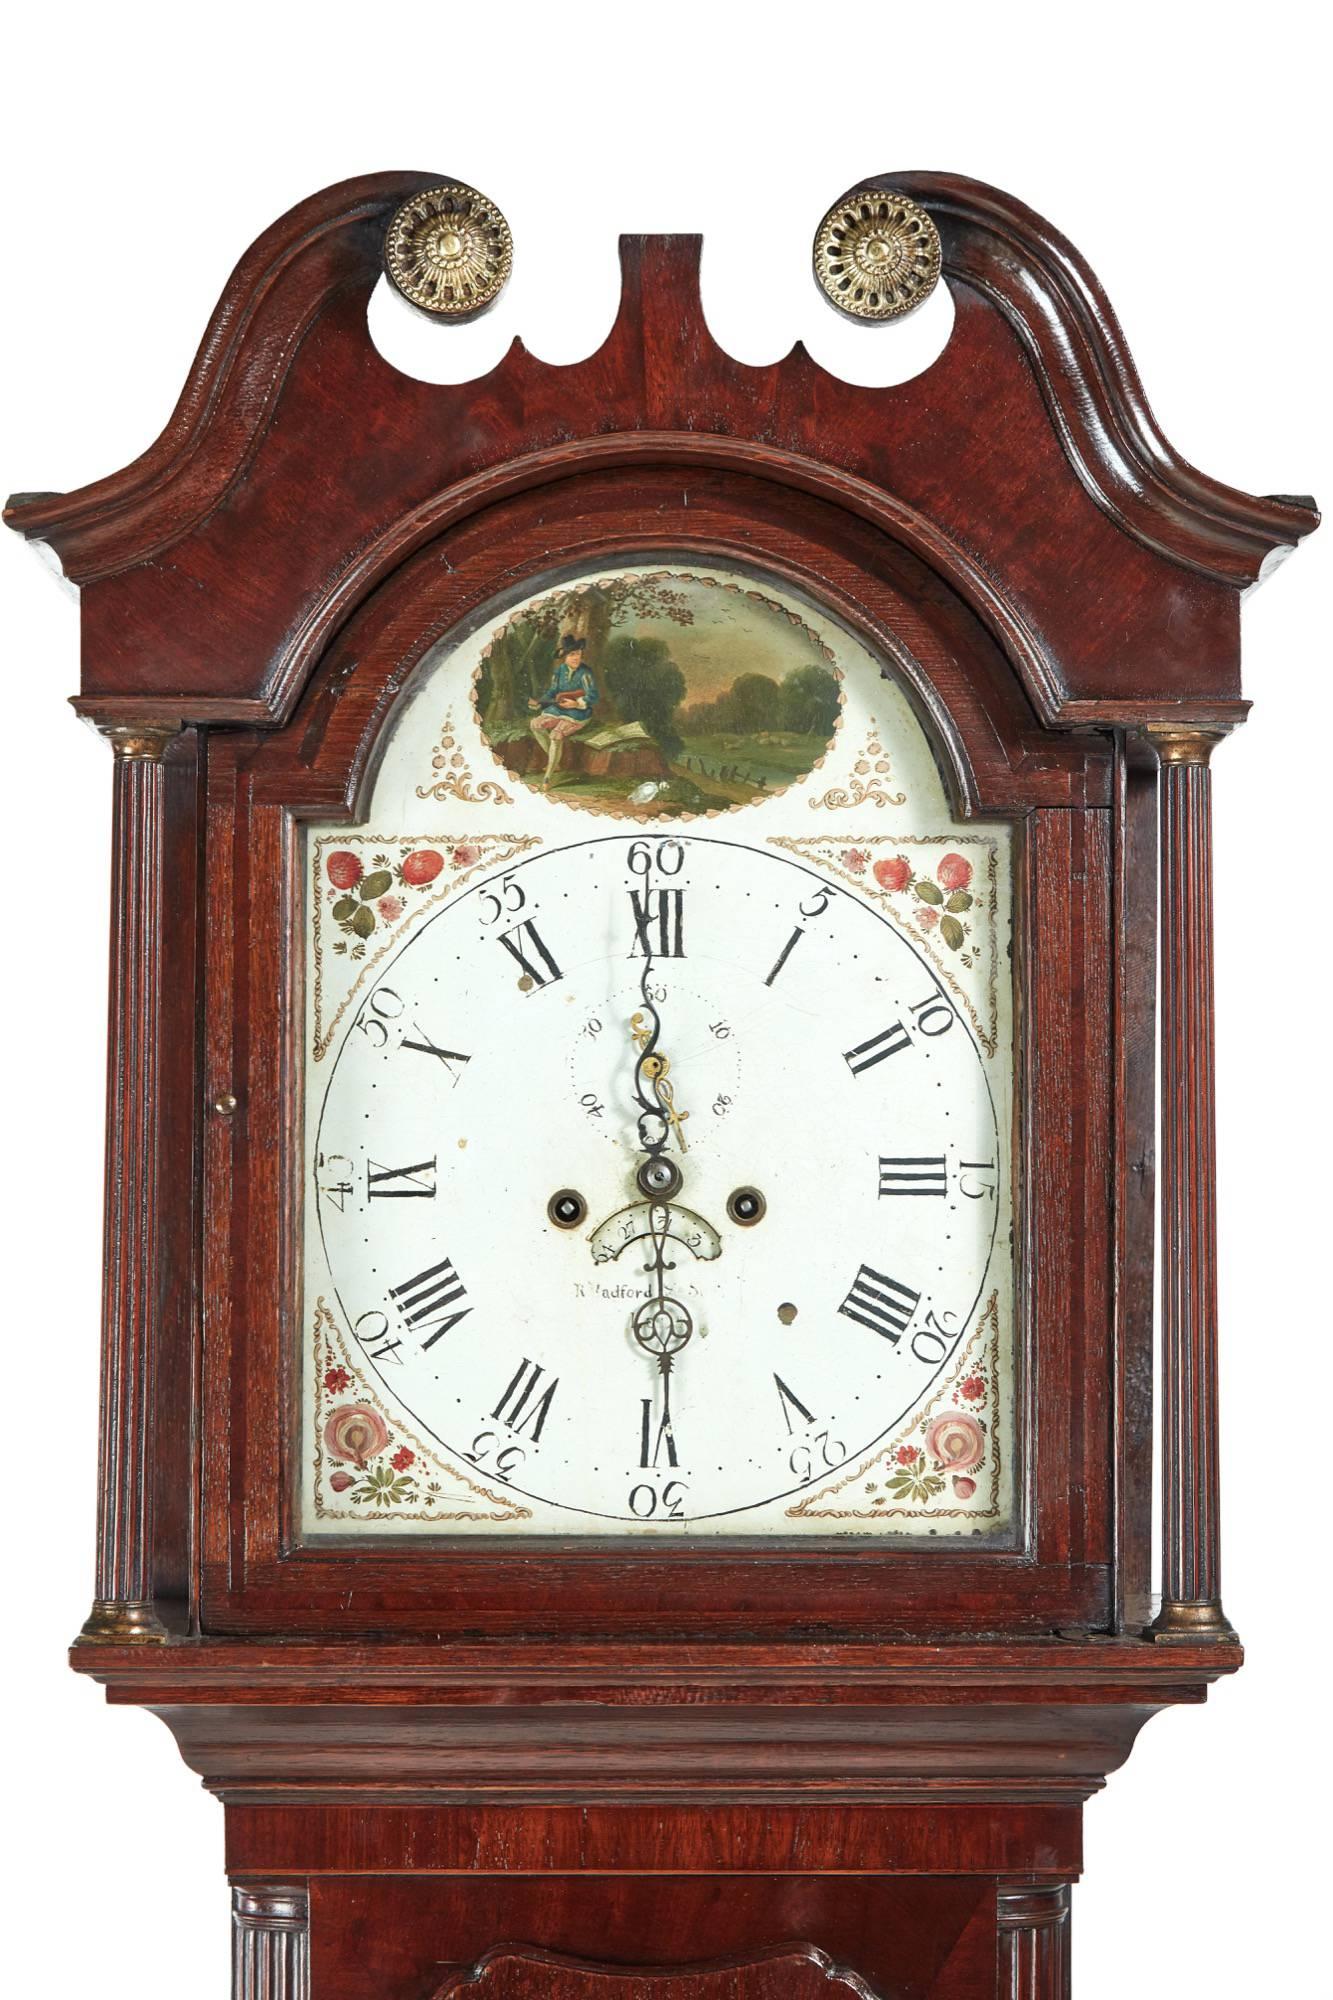 George III oak and mahogany 8 day grandfather clock, with a swan-neck pediment, lovely decorative arched painted dial with date and seconds dial,8 day duration mechanism striking the hour on the bell, lovely oak and mahogany case with a shaped door